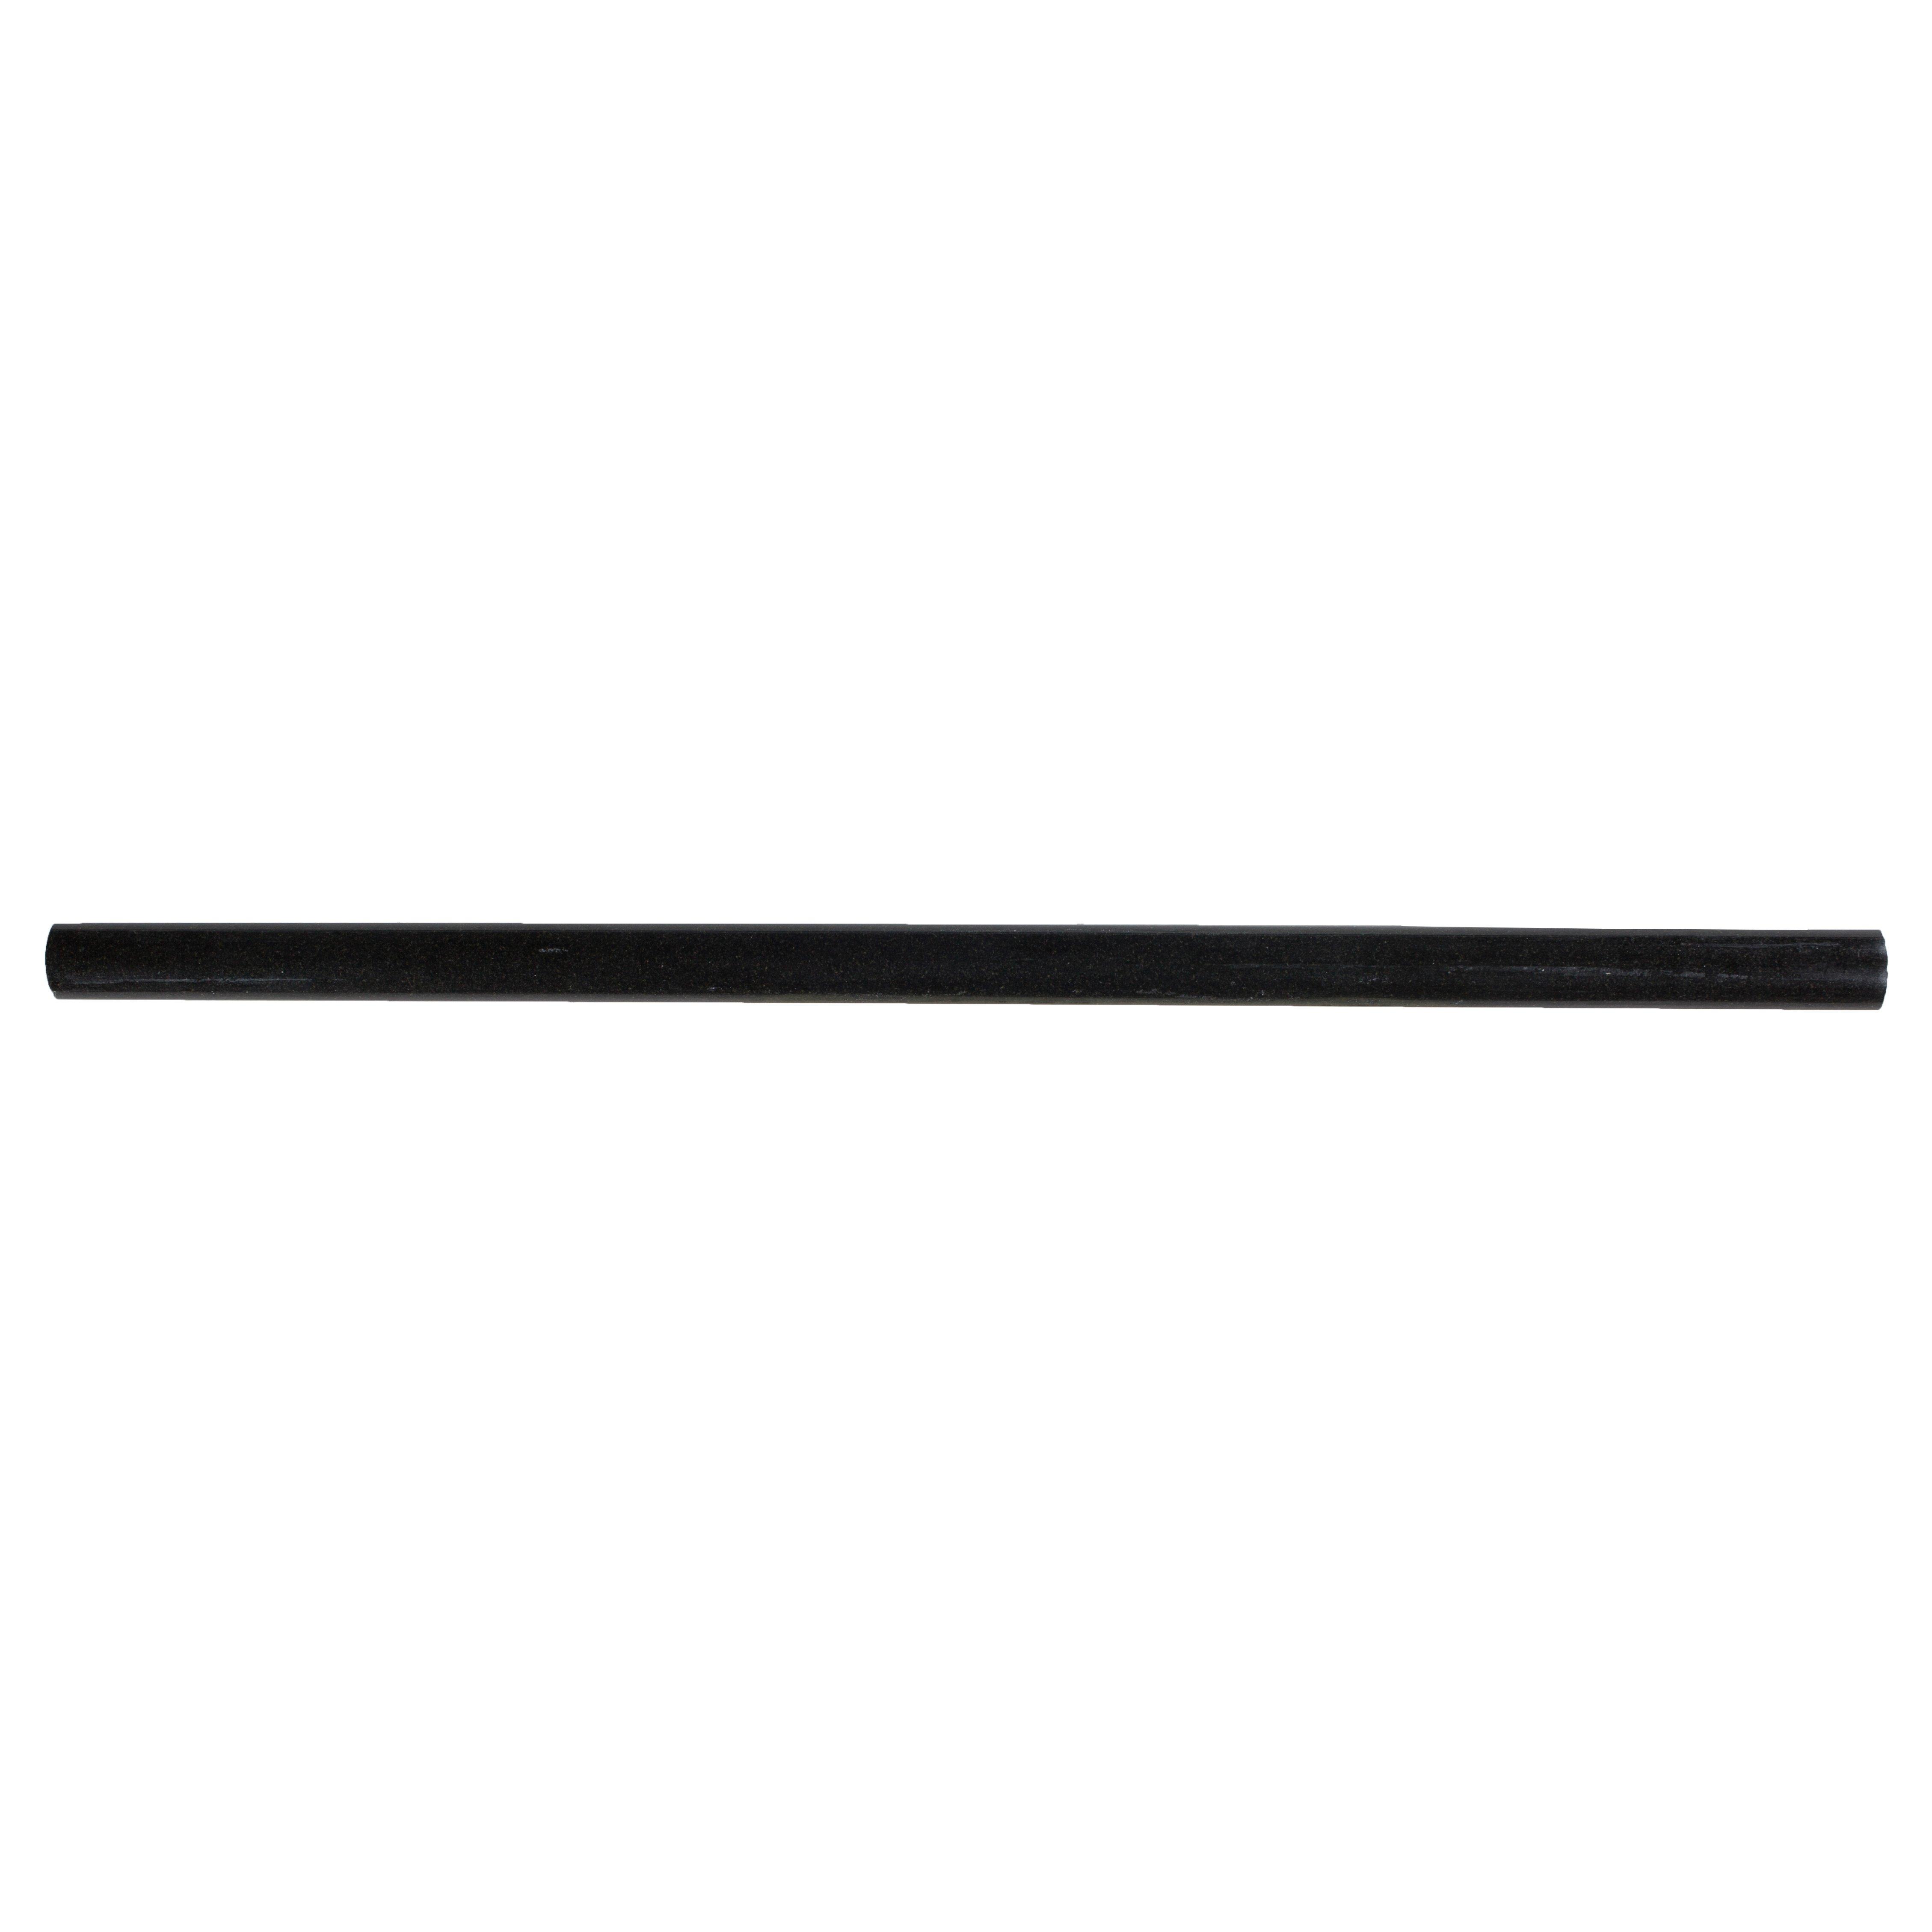 Absolute Black Marble Pencil